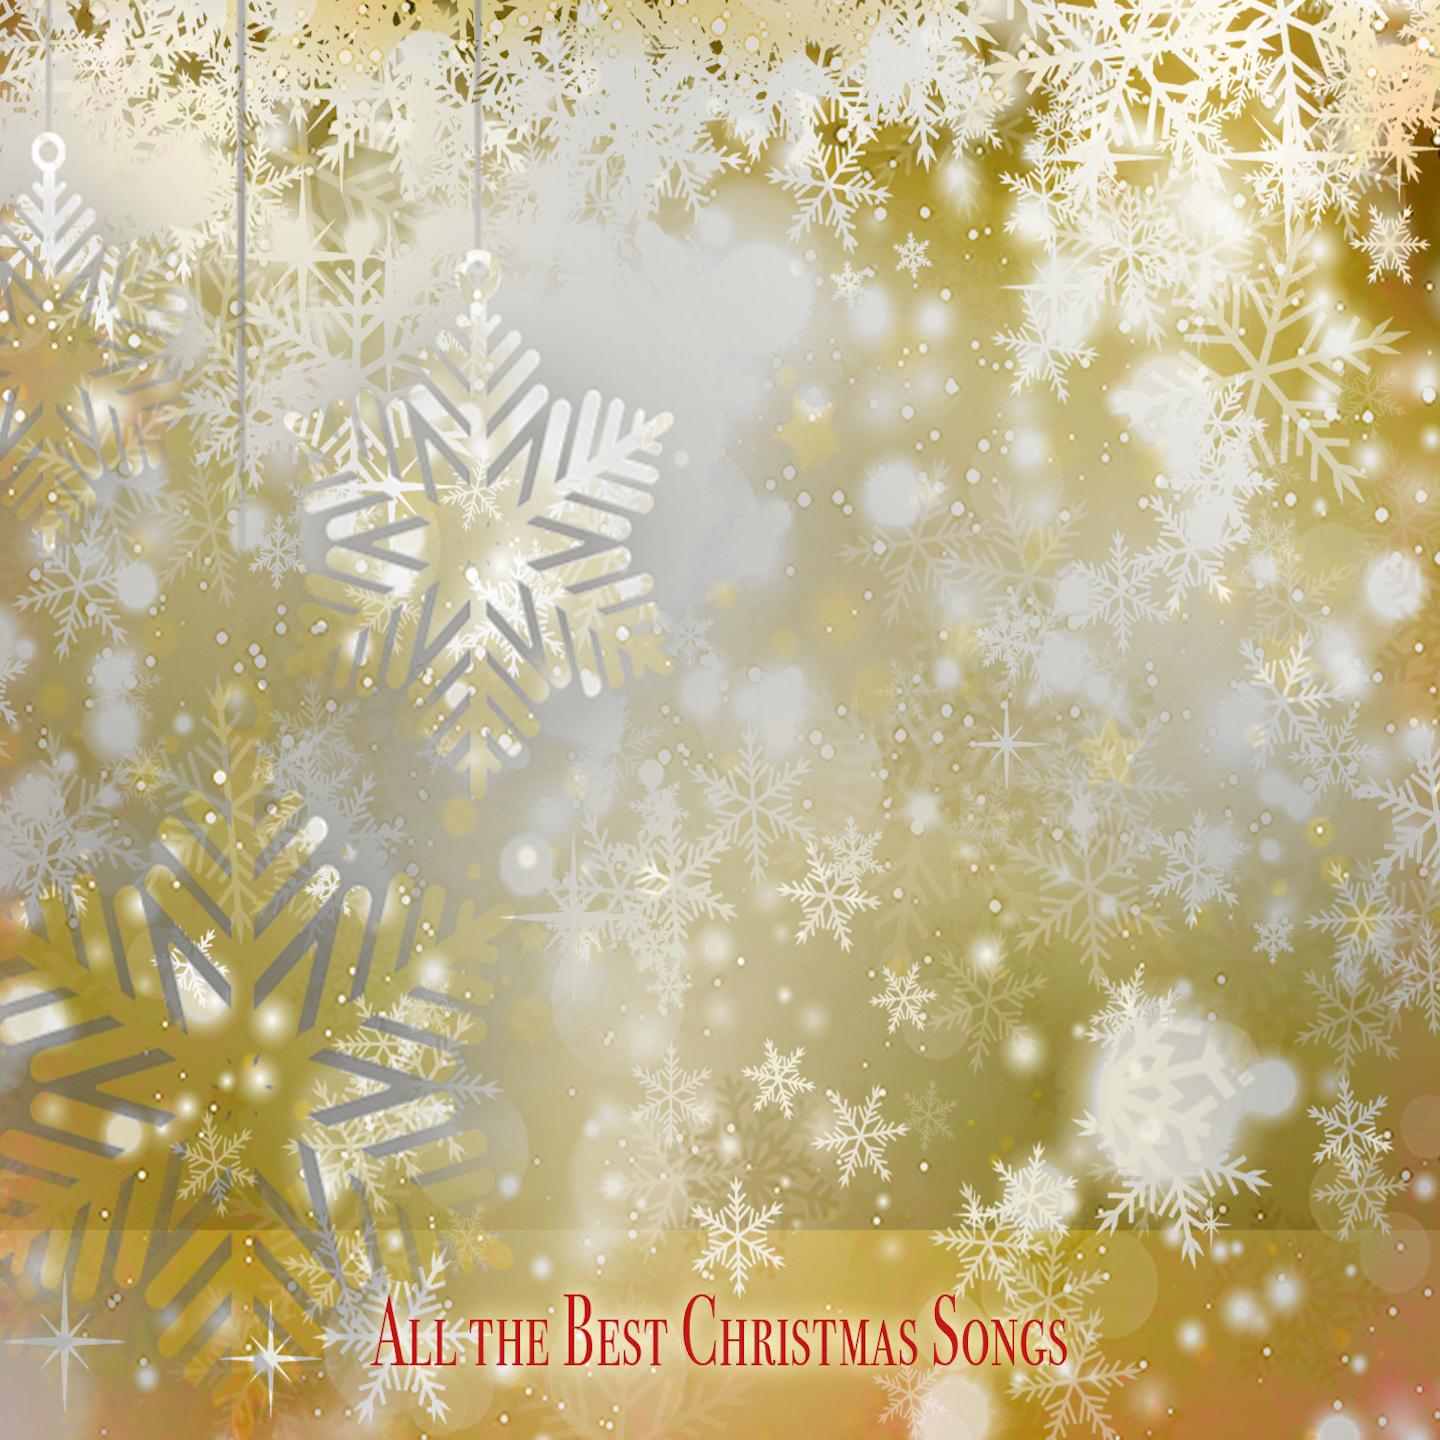 All the Best Christmas Songs (Merry Christmas)